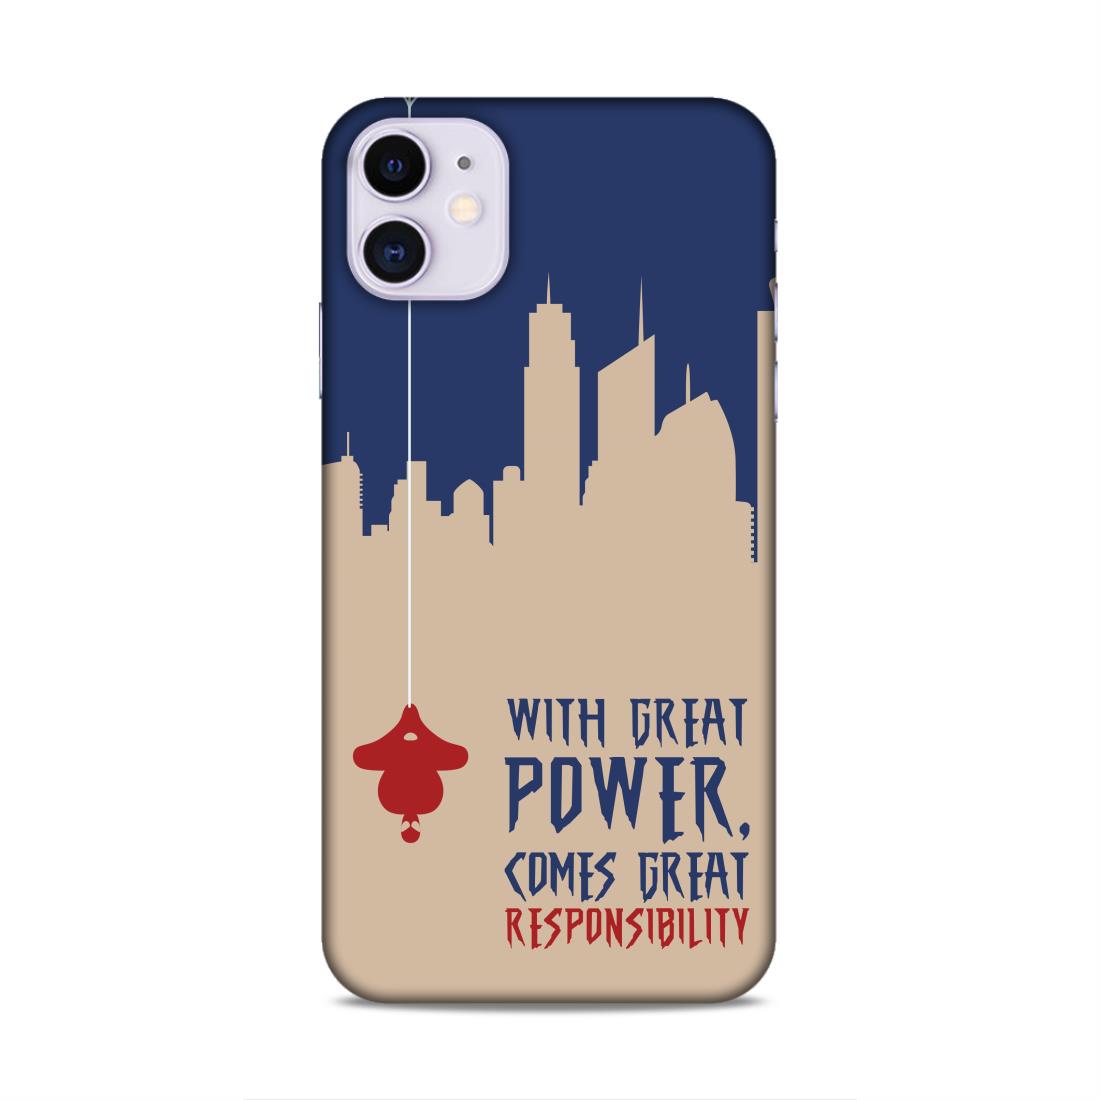 Great Power Comes Great Responsibility Hard Back Case For Apple iPhone 11